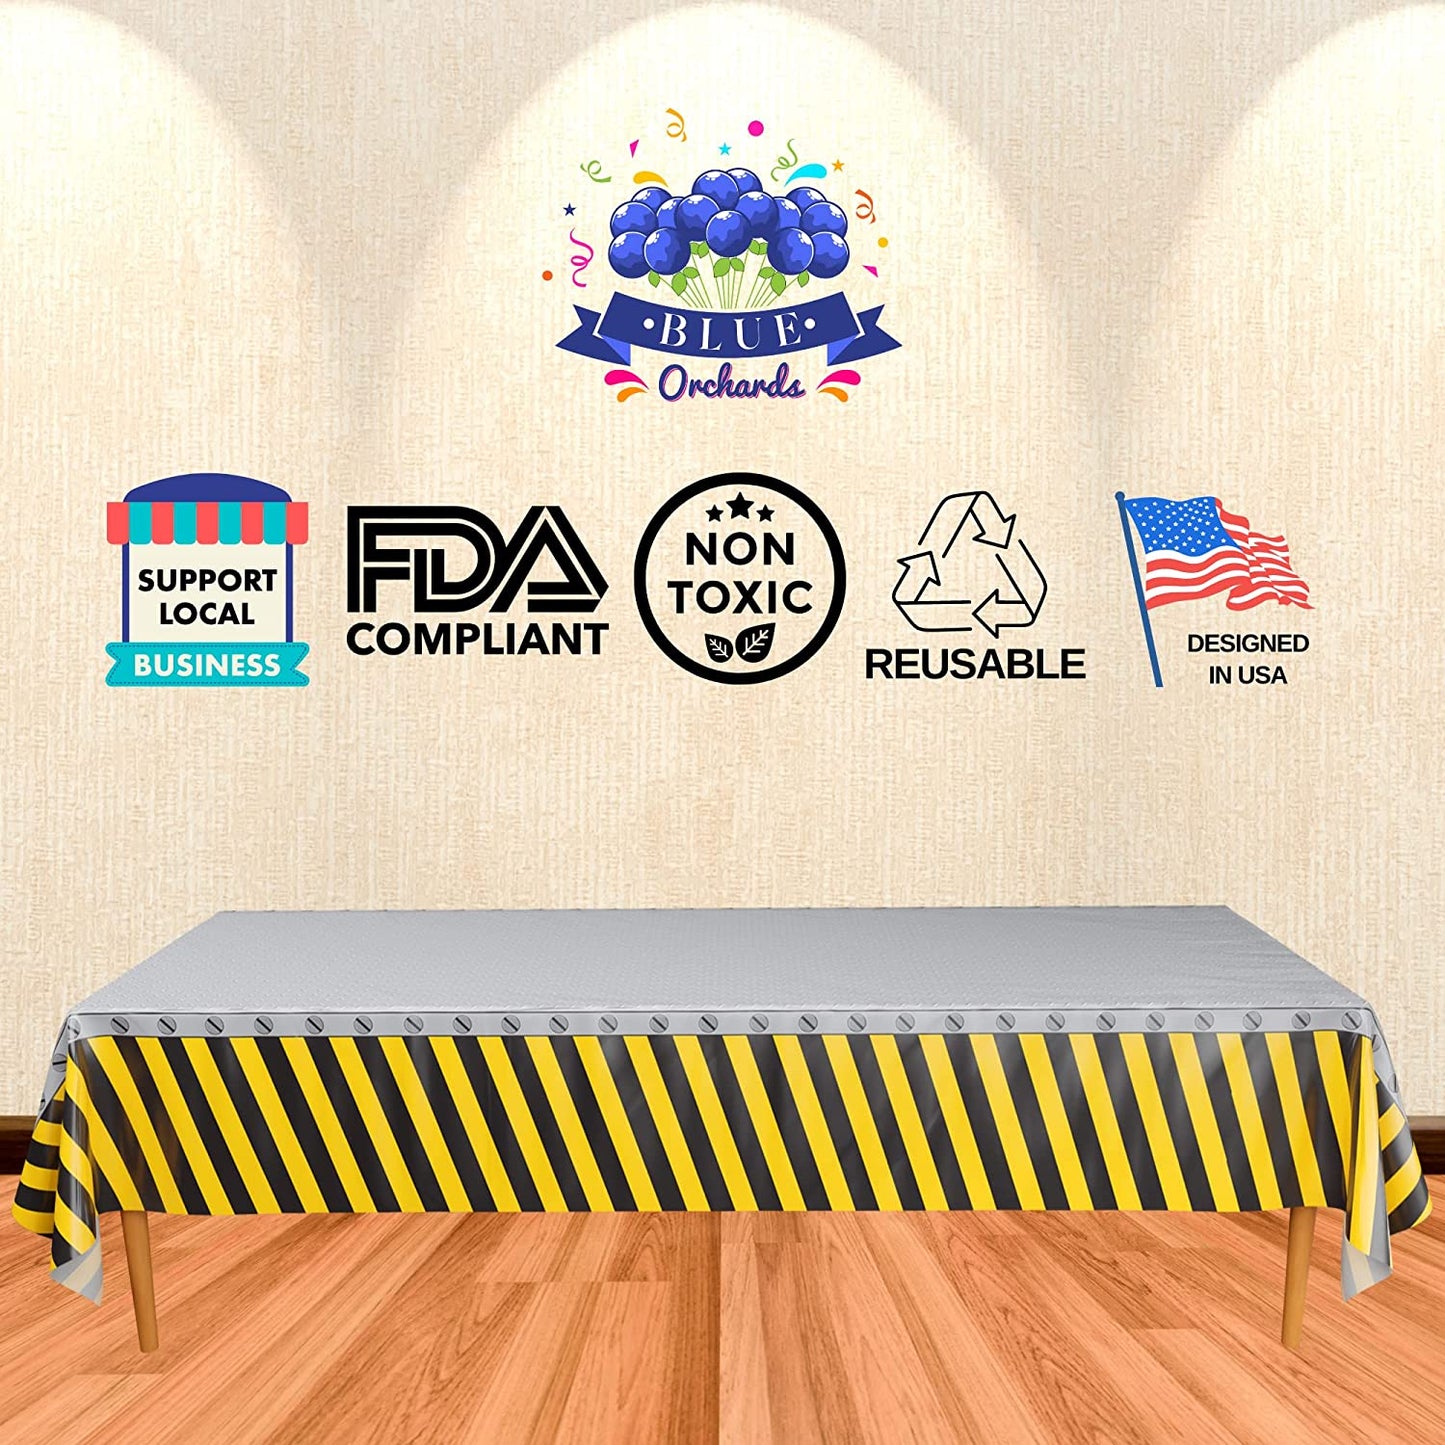 Construction Theme Table cover - FBA Compliant, Non Toxic, Reusable, and Designed in USA